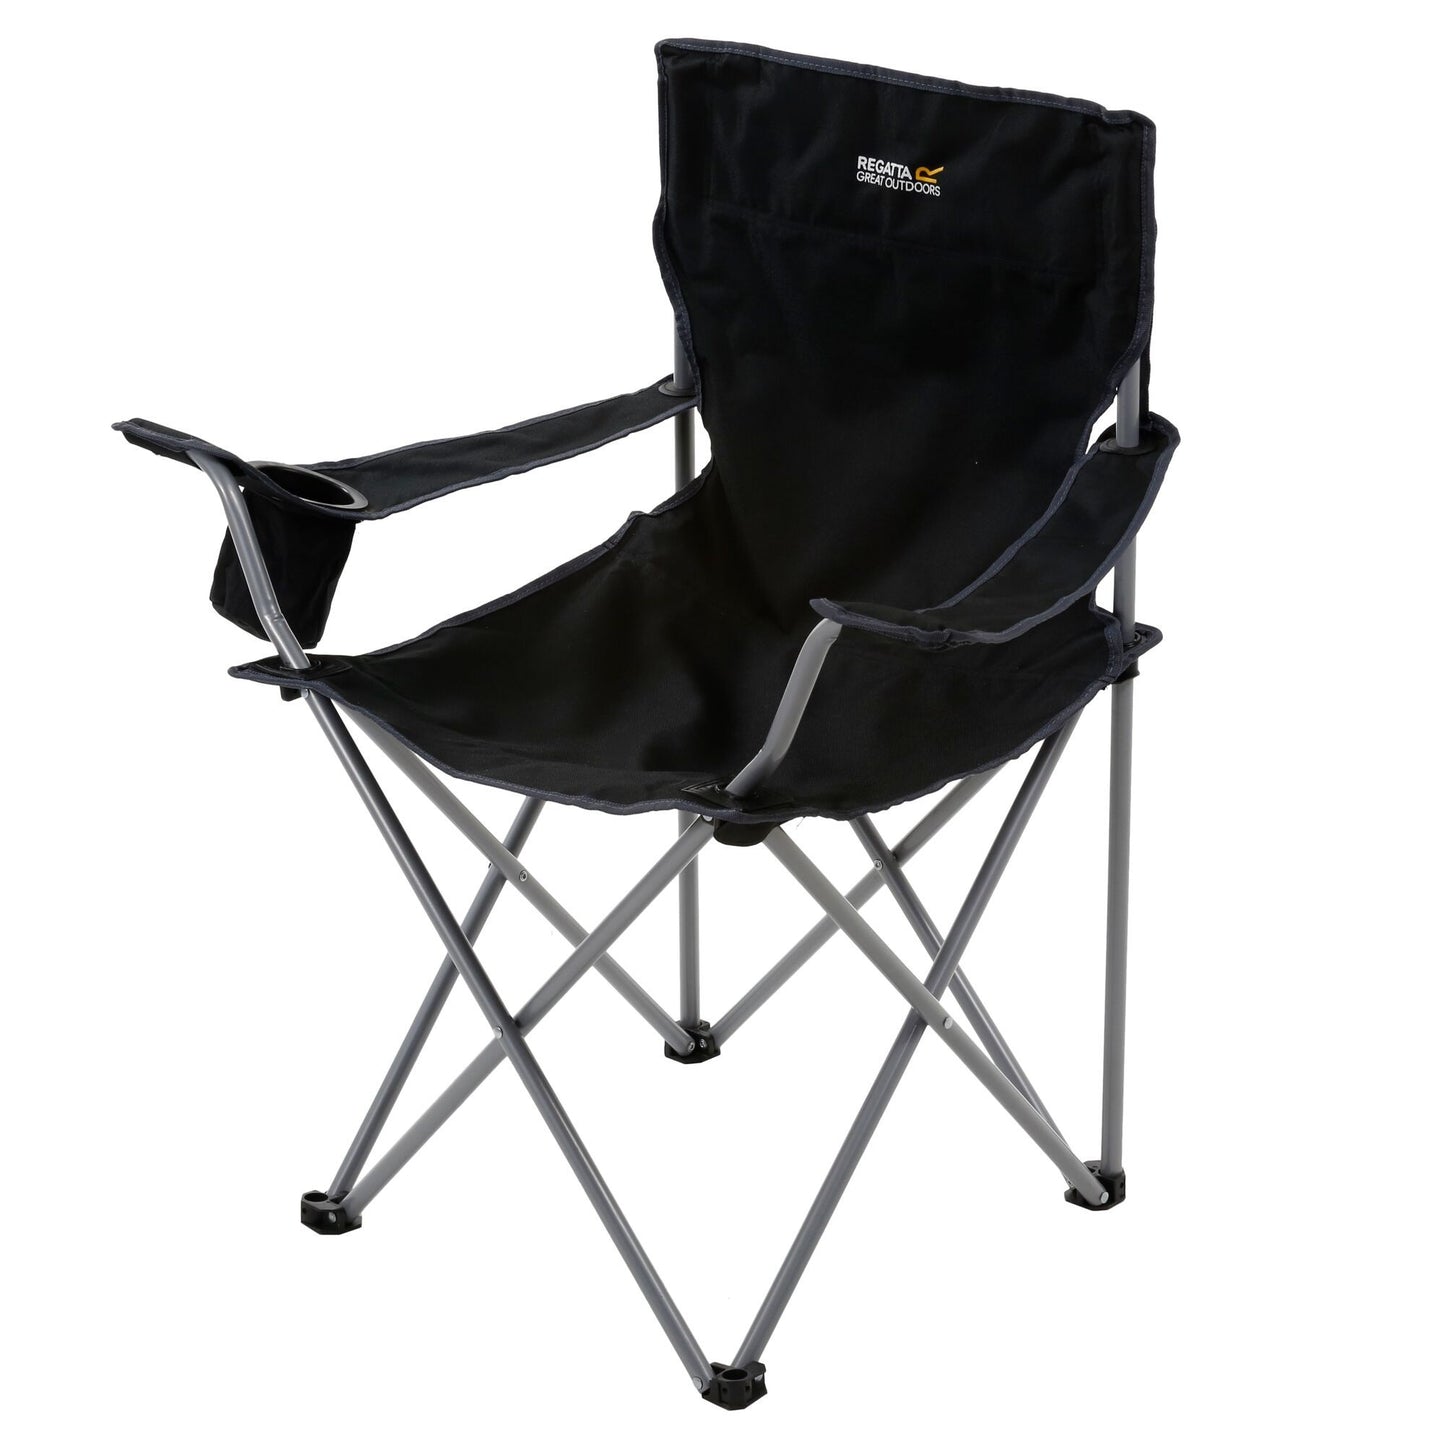 Regatta Isla Chair - Black/Seal Grey - Available in store only